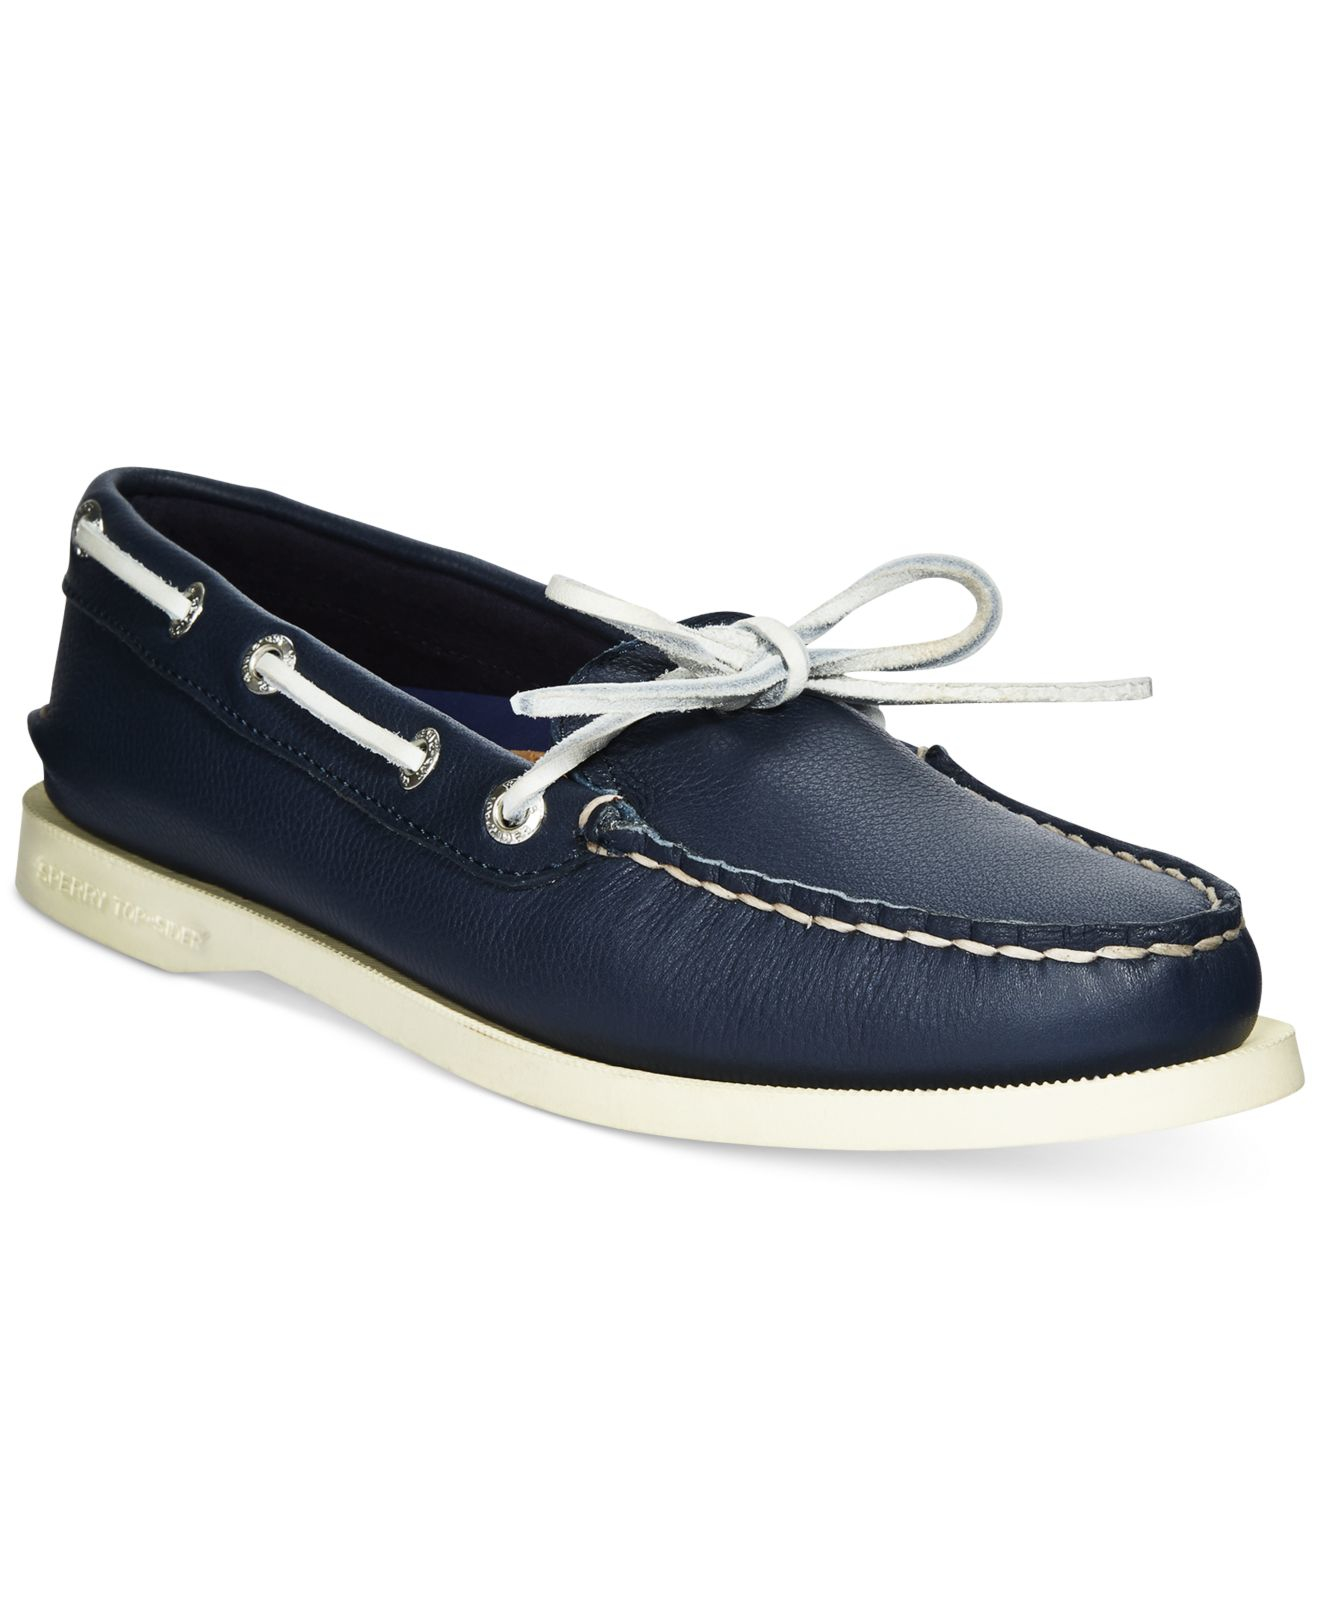 Lyst - Sperry Top-Sider Women's Authentic Original Kent Boat Shoes in Blue